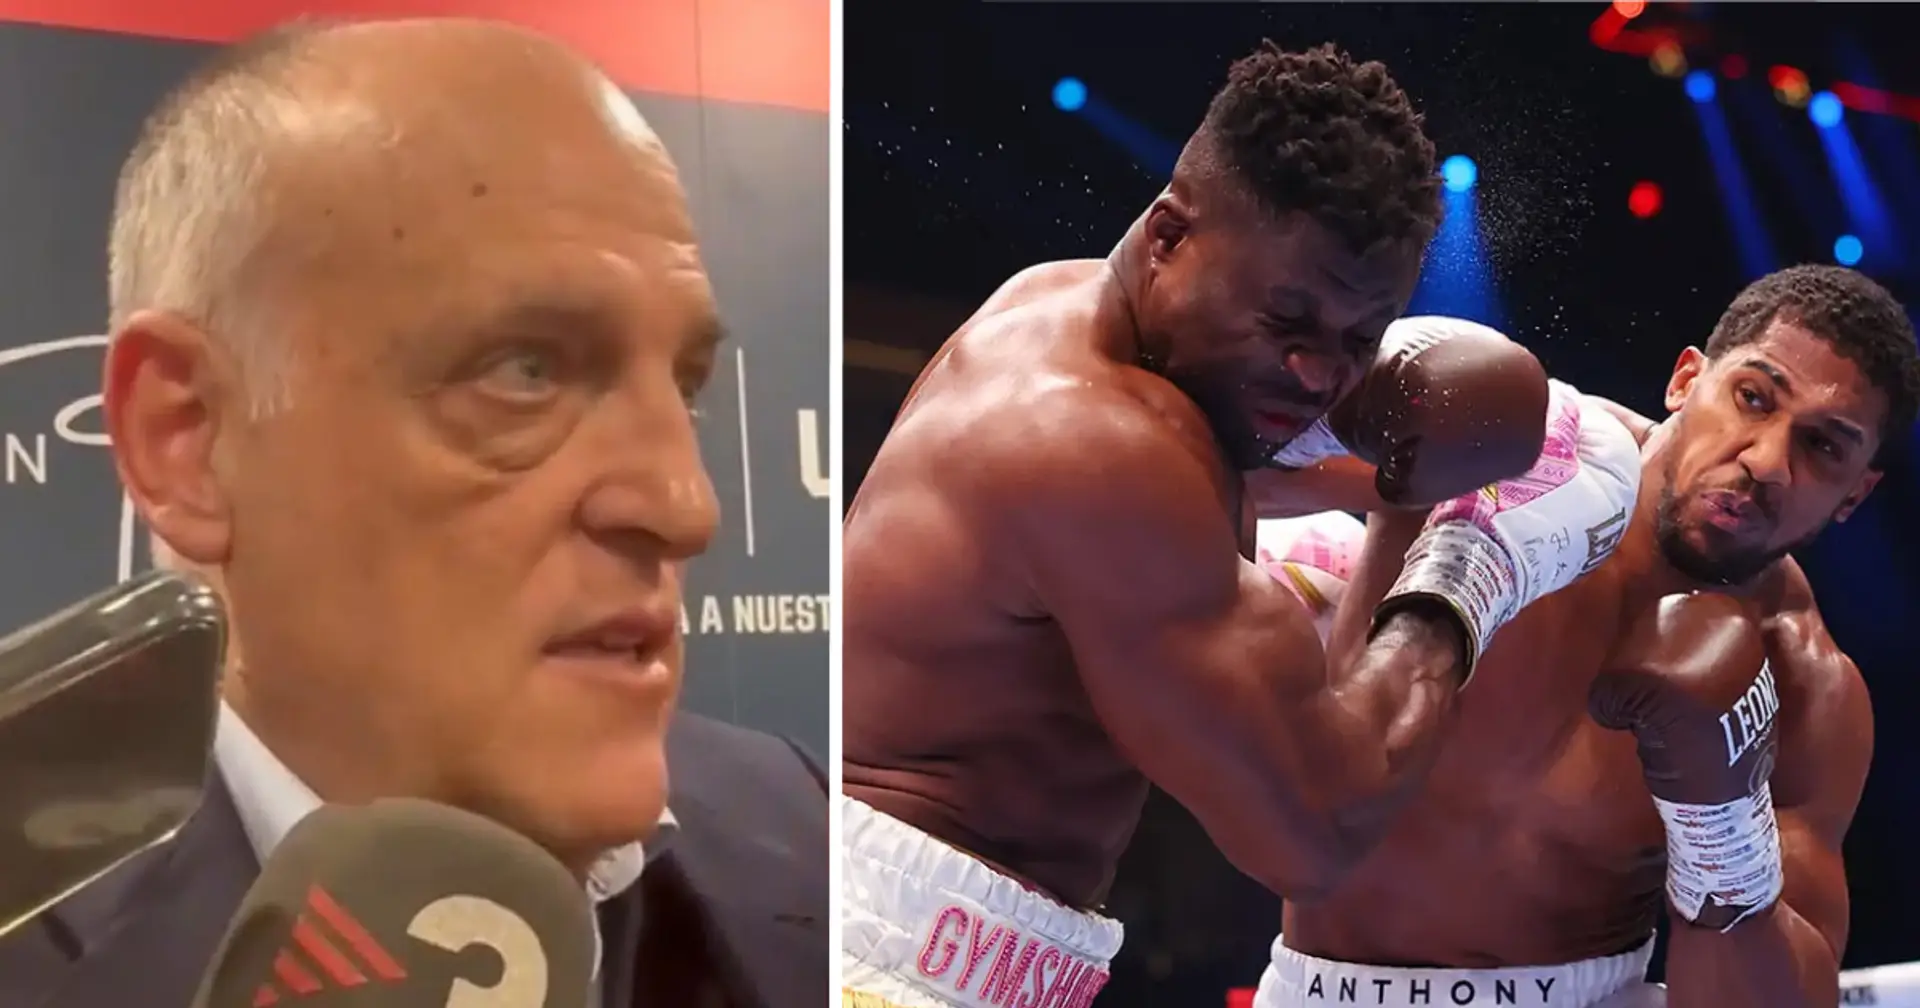 Barca senior player shows support for Anthony Joshua and 2 more under-radar stories